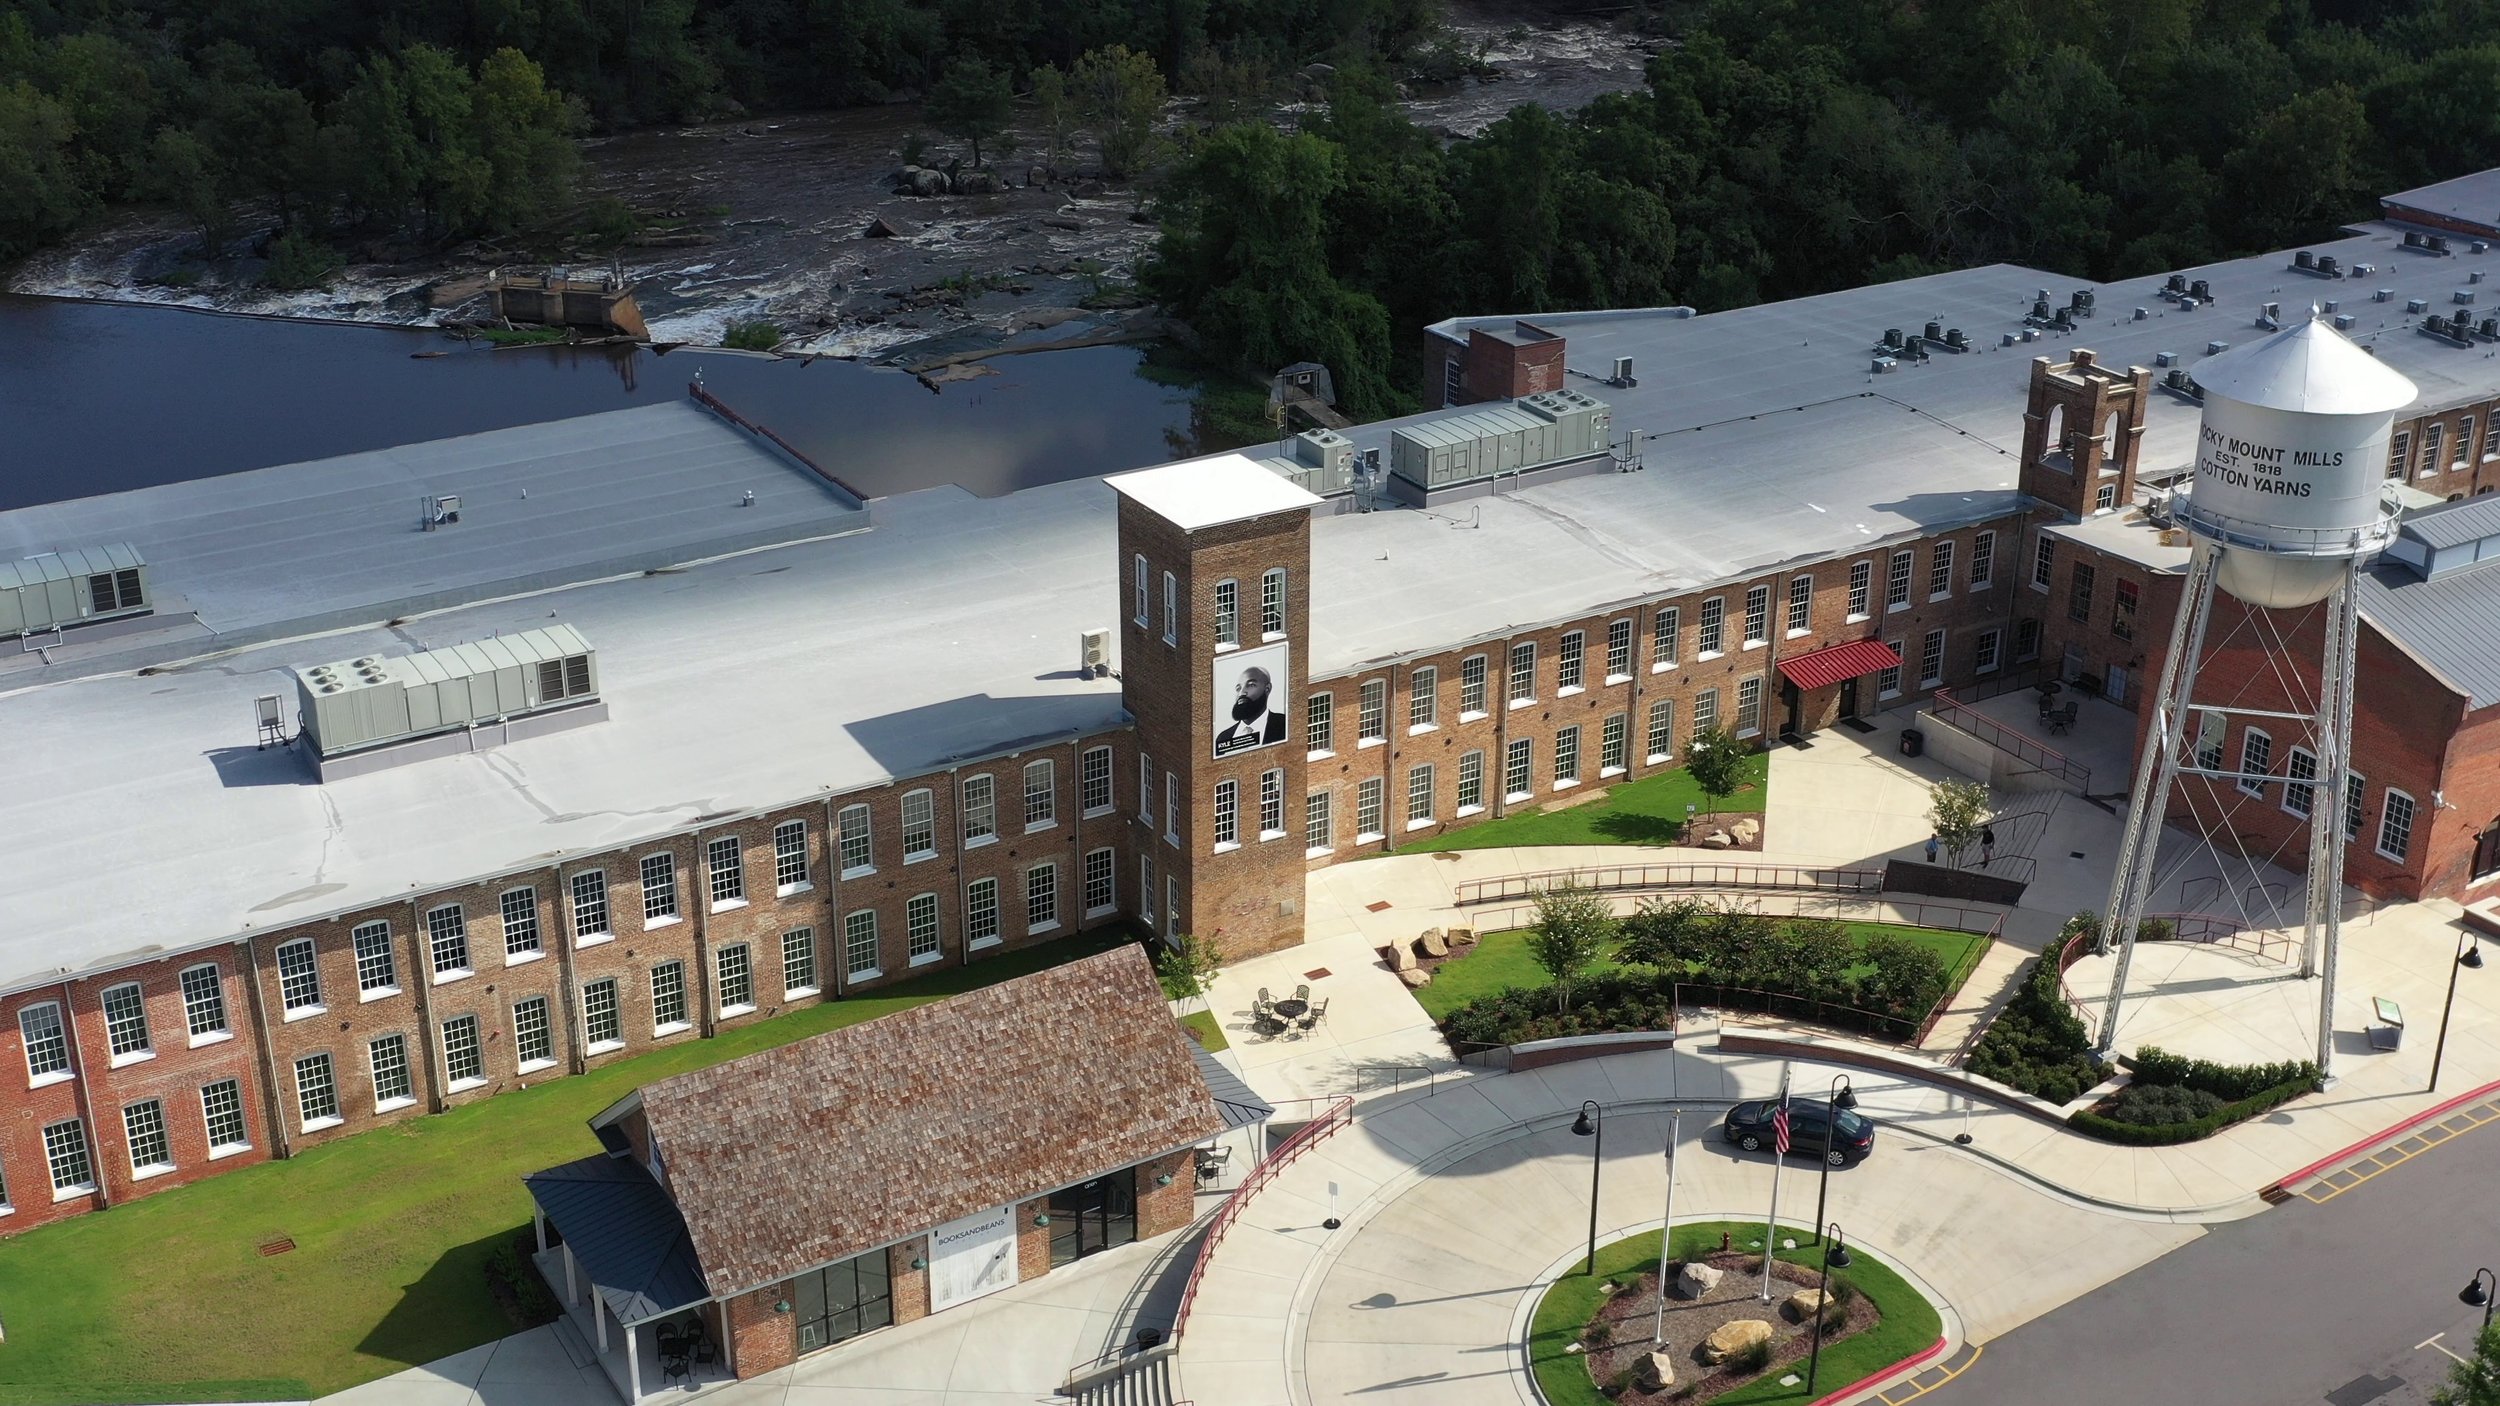  This drone shot captures the majesty of the banner portraits. Featured here is Kyle Johnson at Rocky Mount Mills.  Photo courtesy of Jonathan Duran  